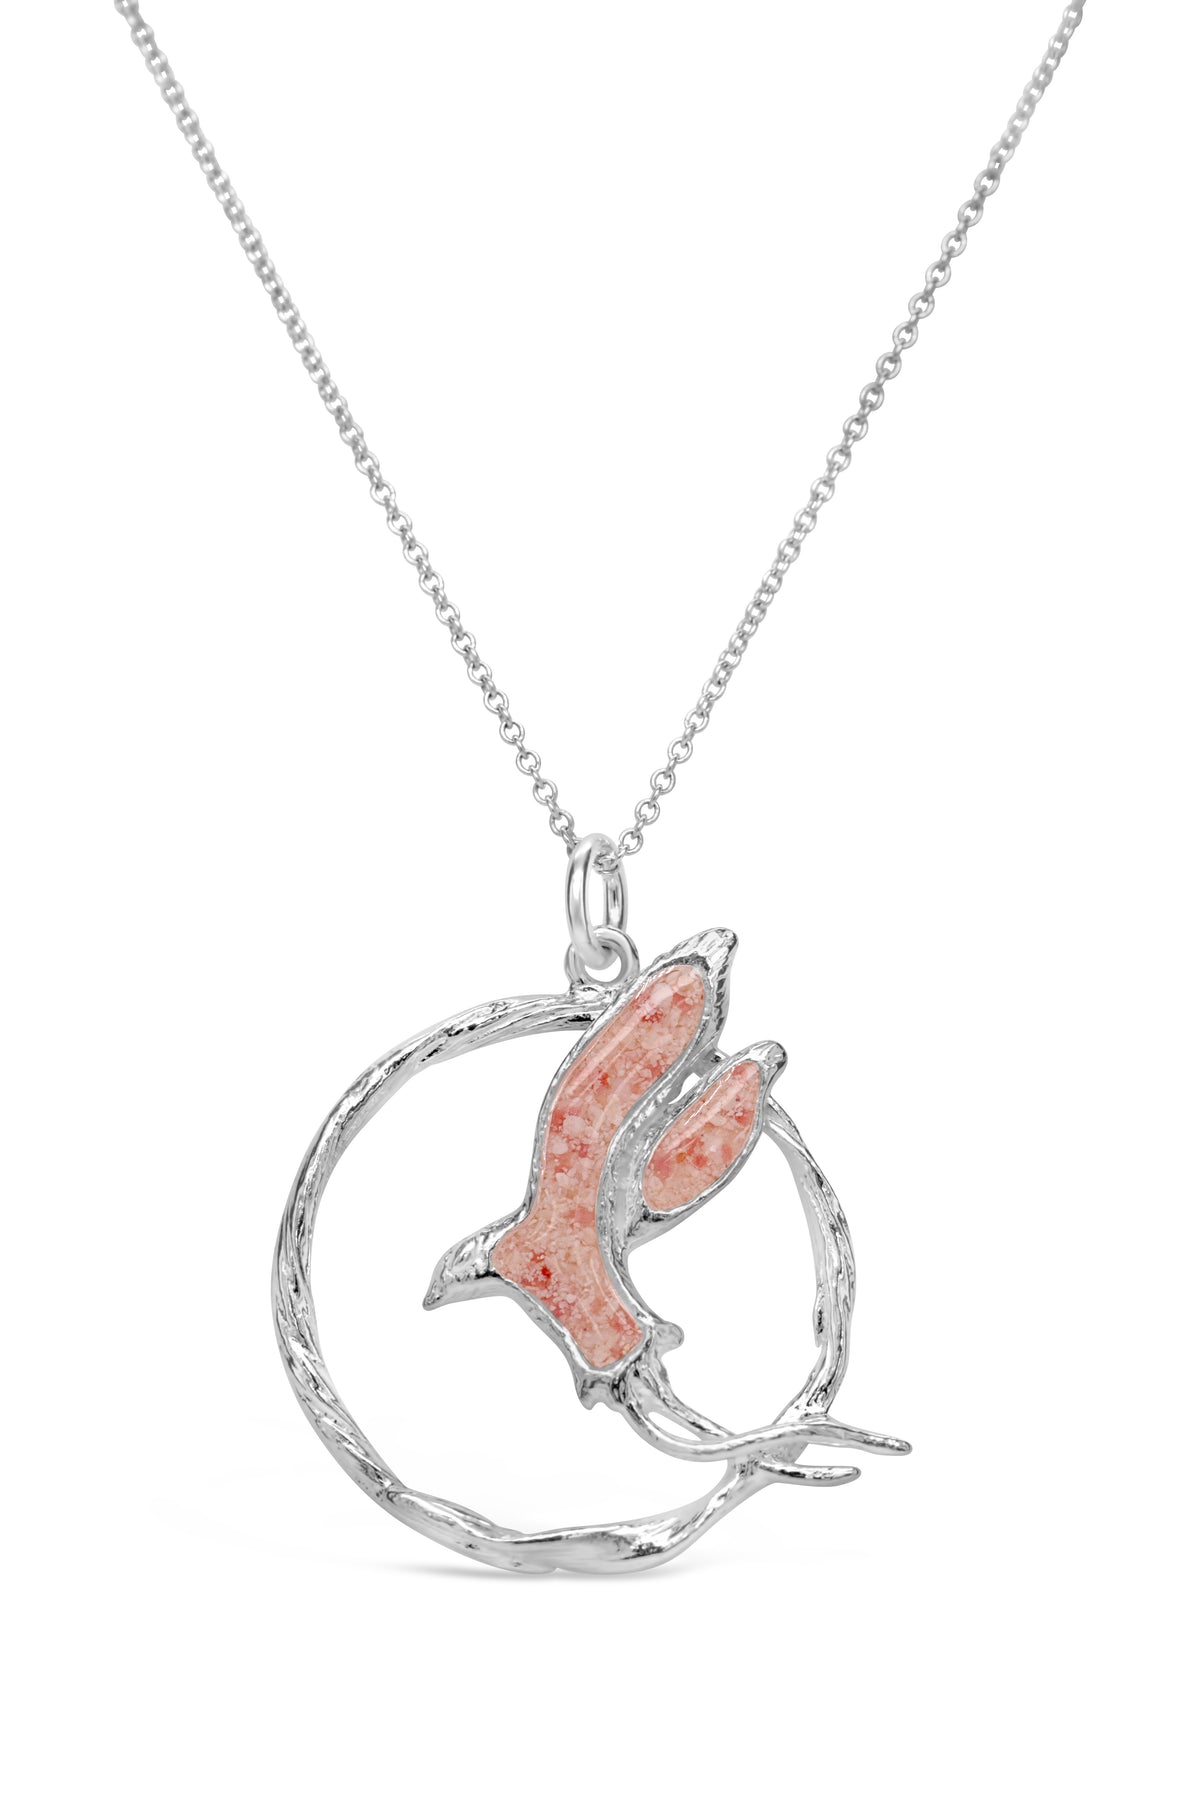 Longtail ~ The Longtail in Flight Pendant